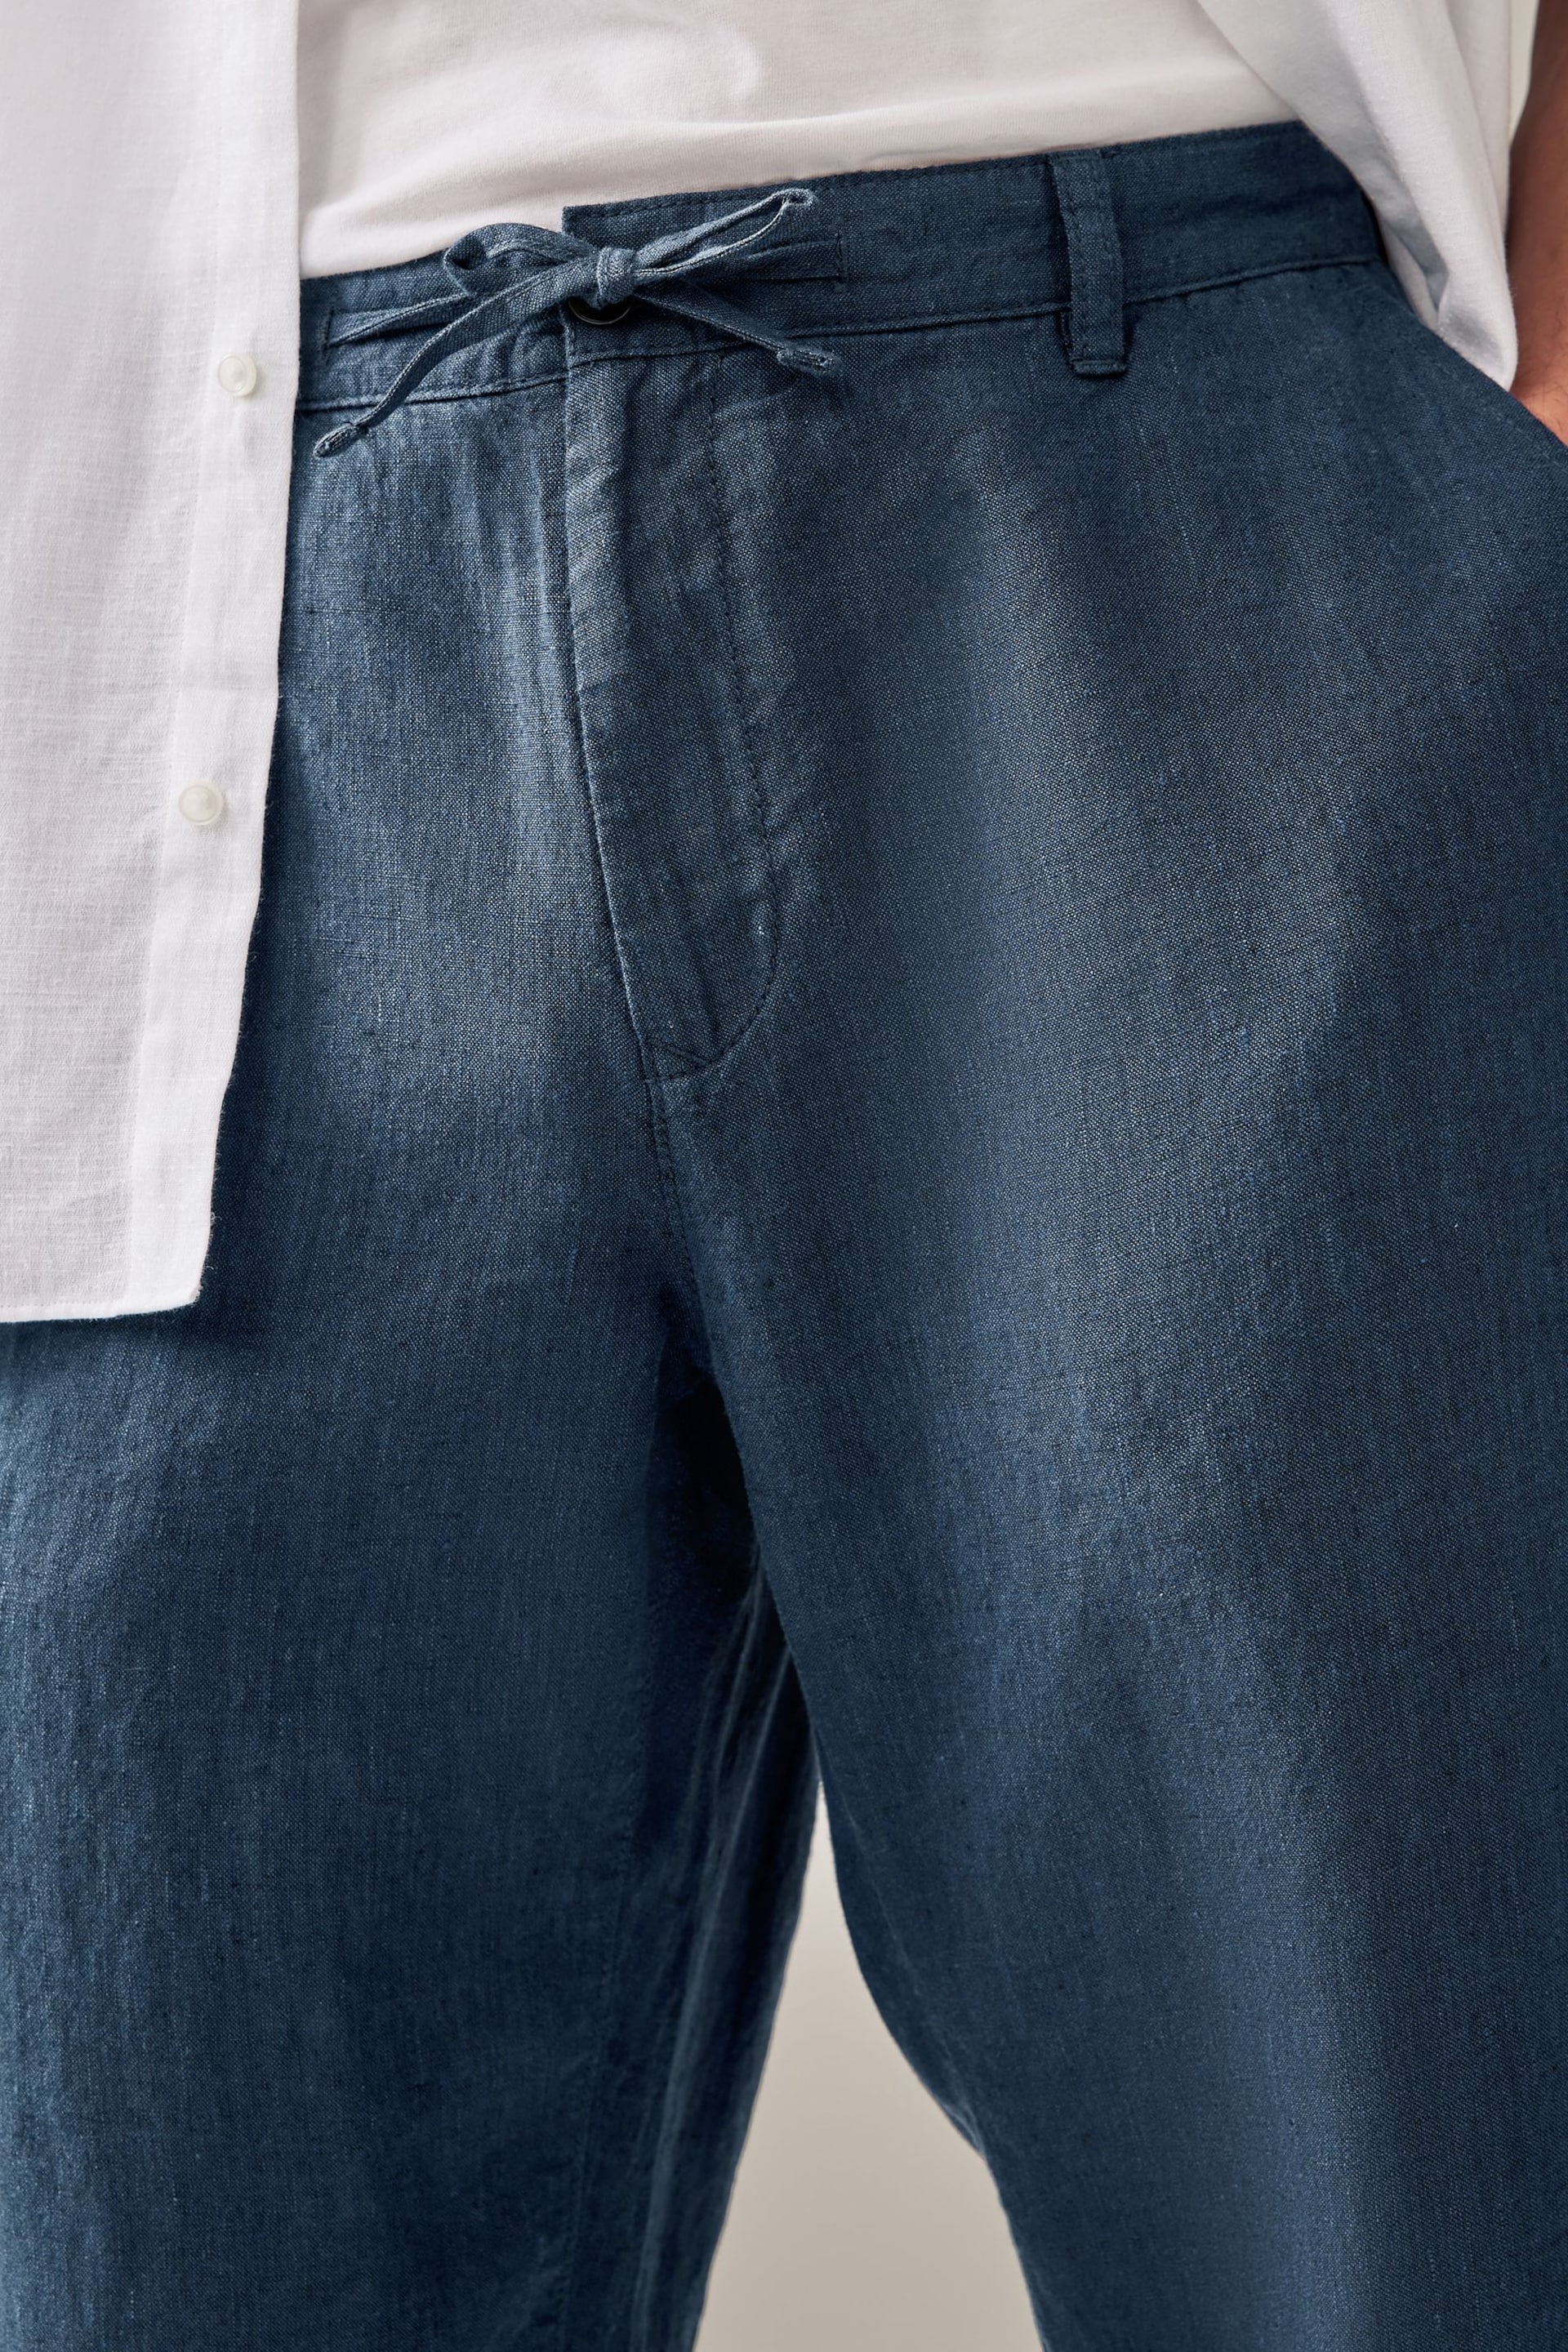 Navy Blue 100% Linen Drawstring Trousers - Image 5 of 8